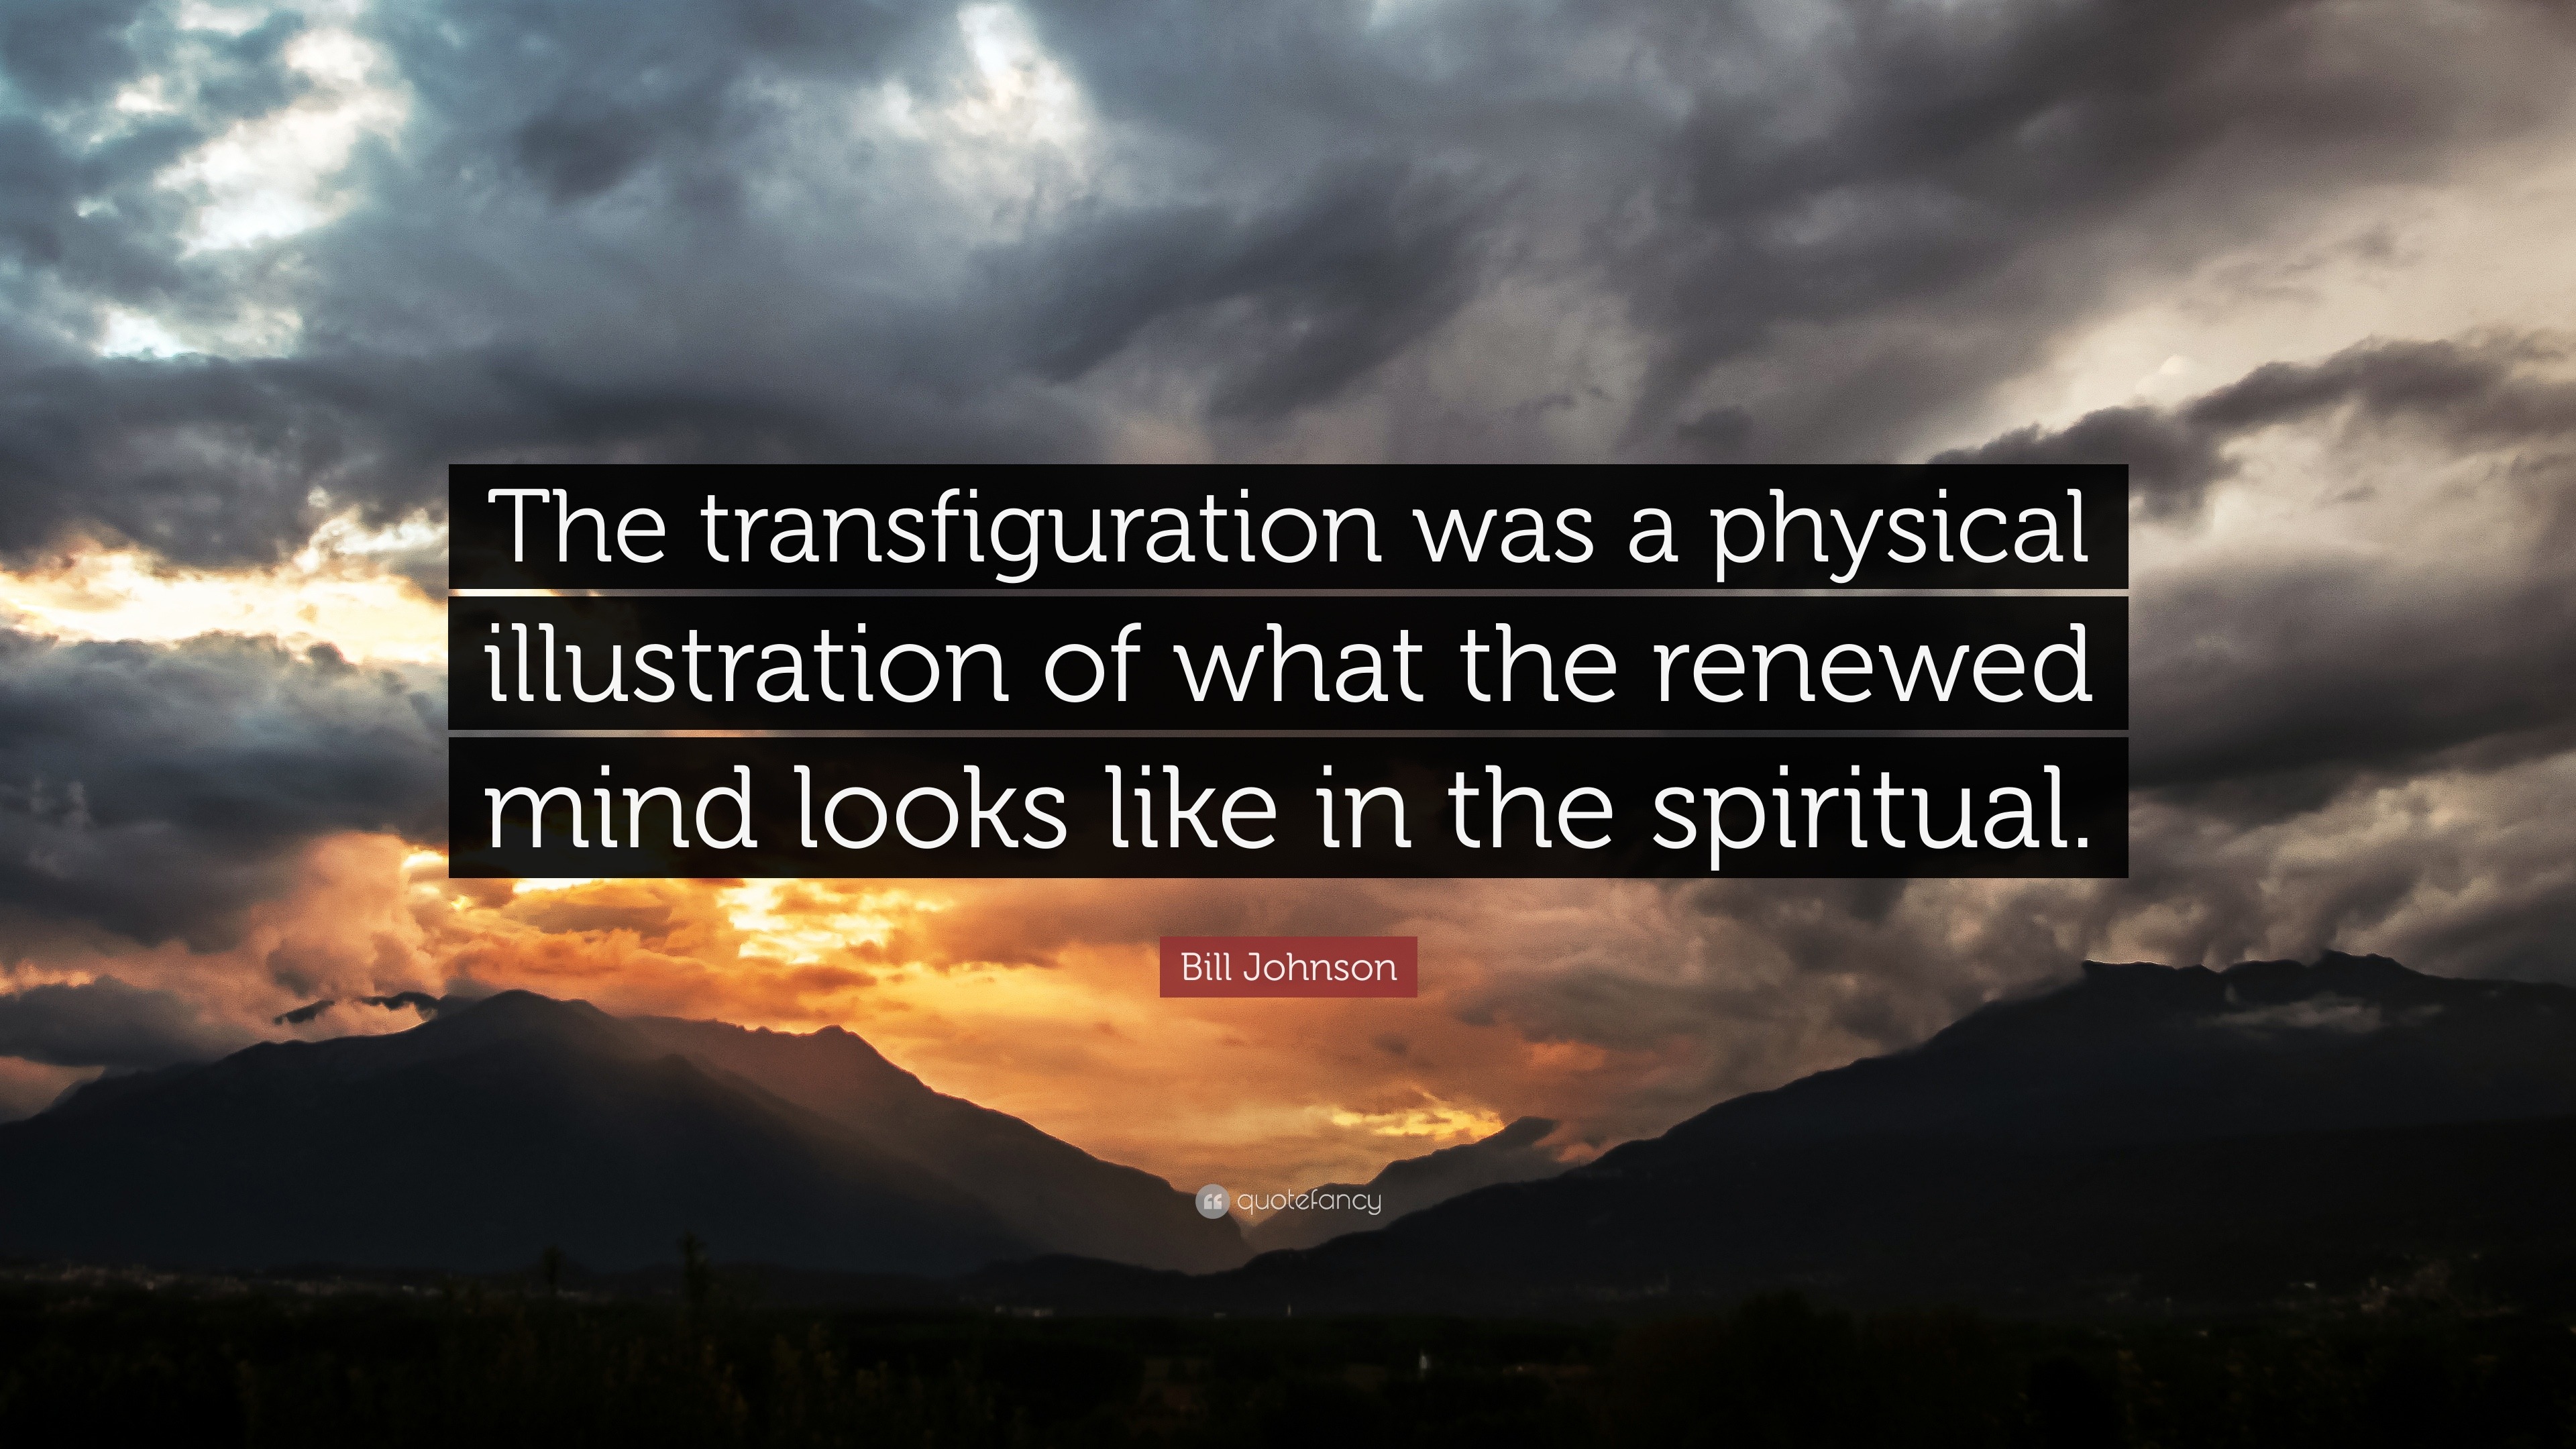 Bill Johnson Quote “The transfiguration was a physical illustration of